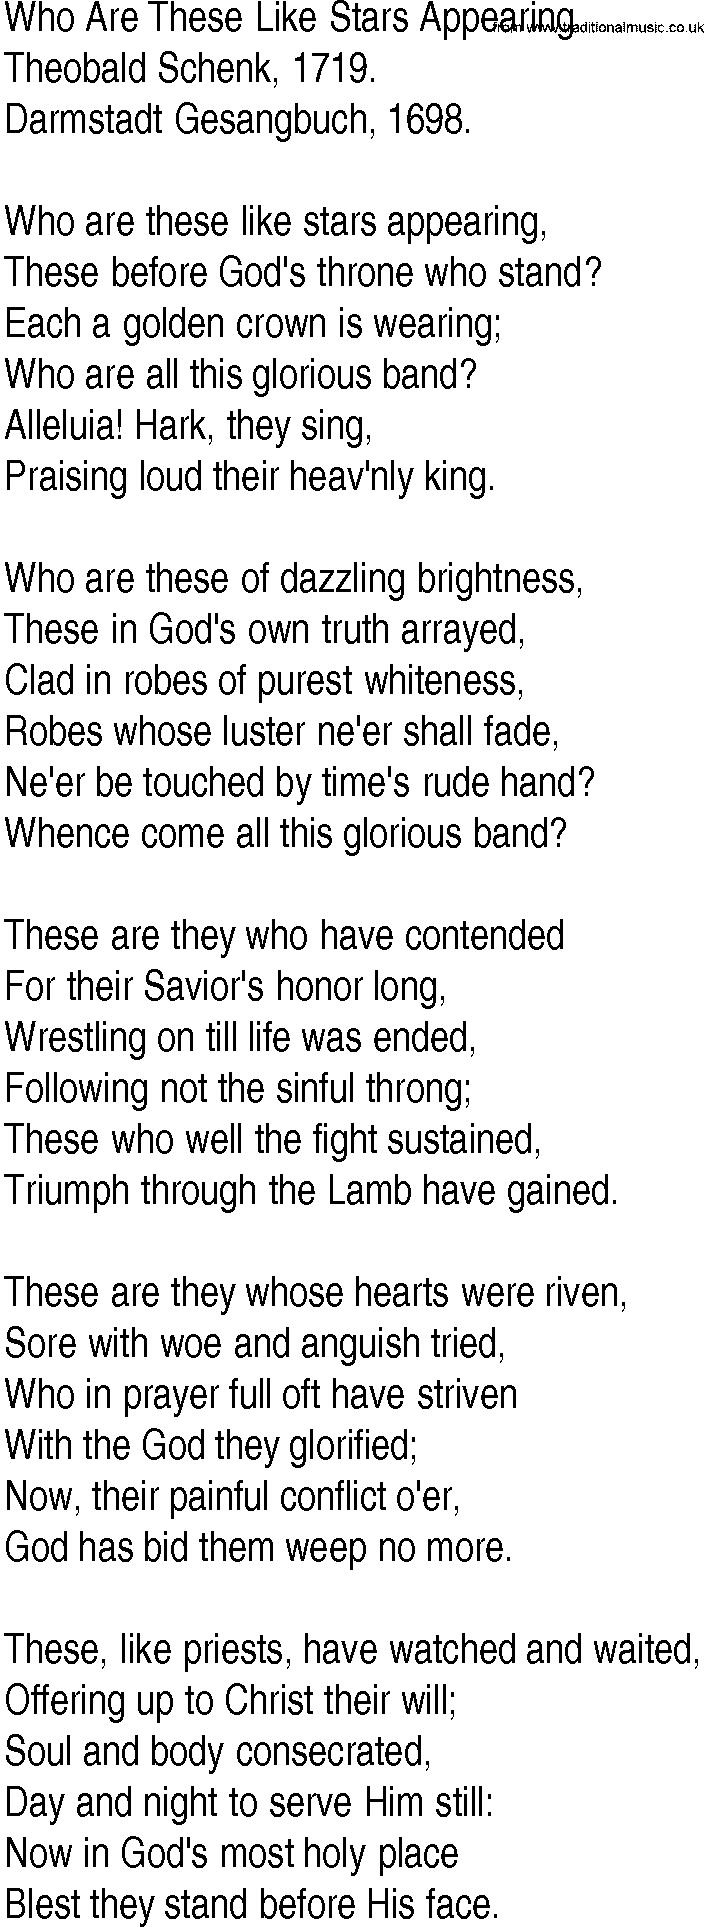 Hymn and Gospel Song: Who Are These Like Stars Appearing by Theobald Schenk lyrics